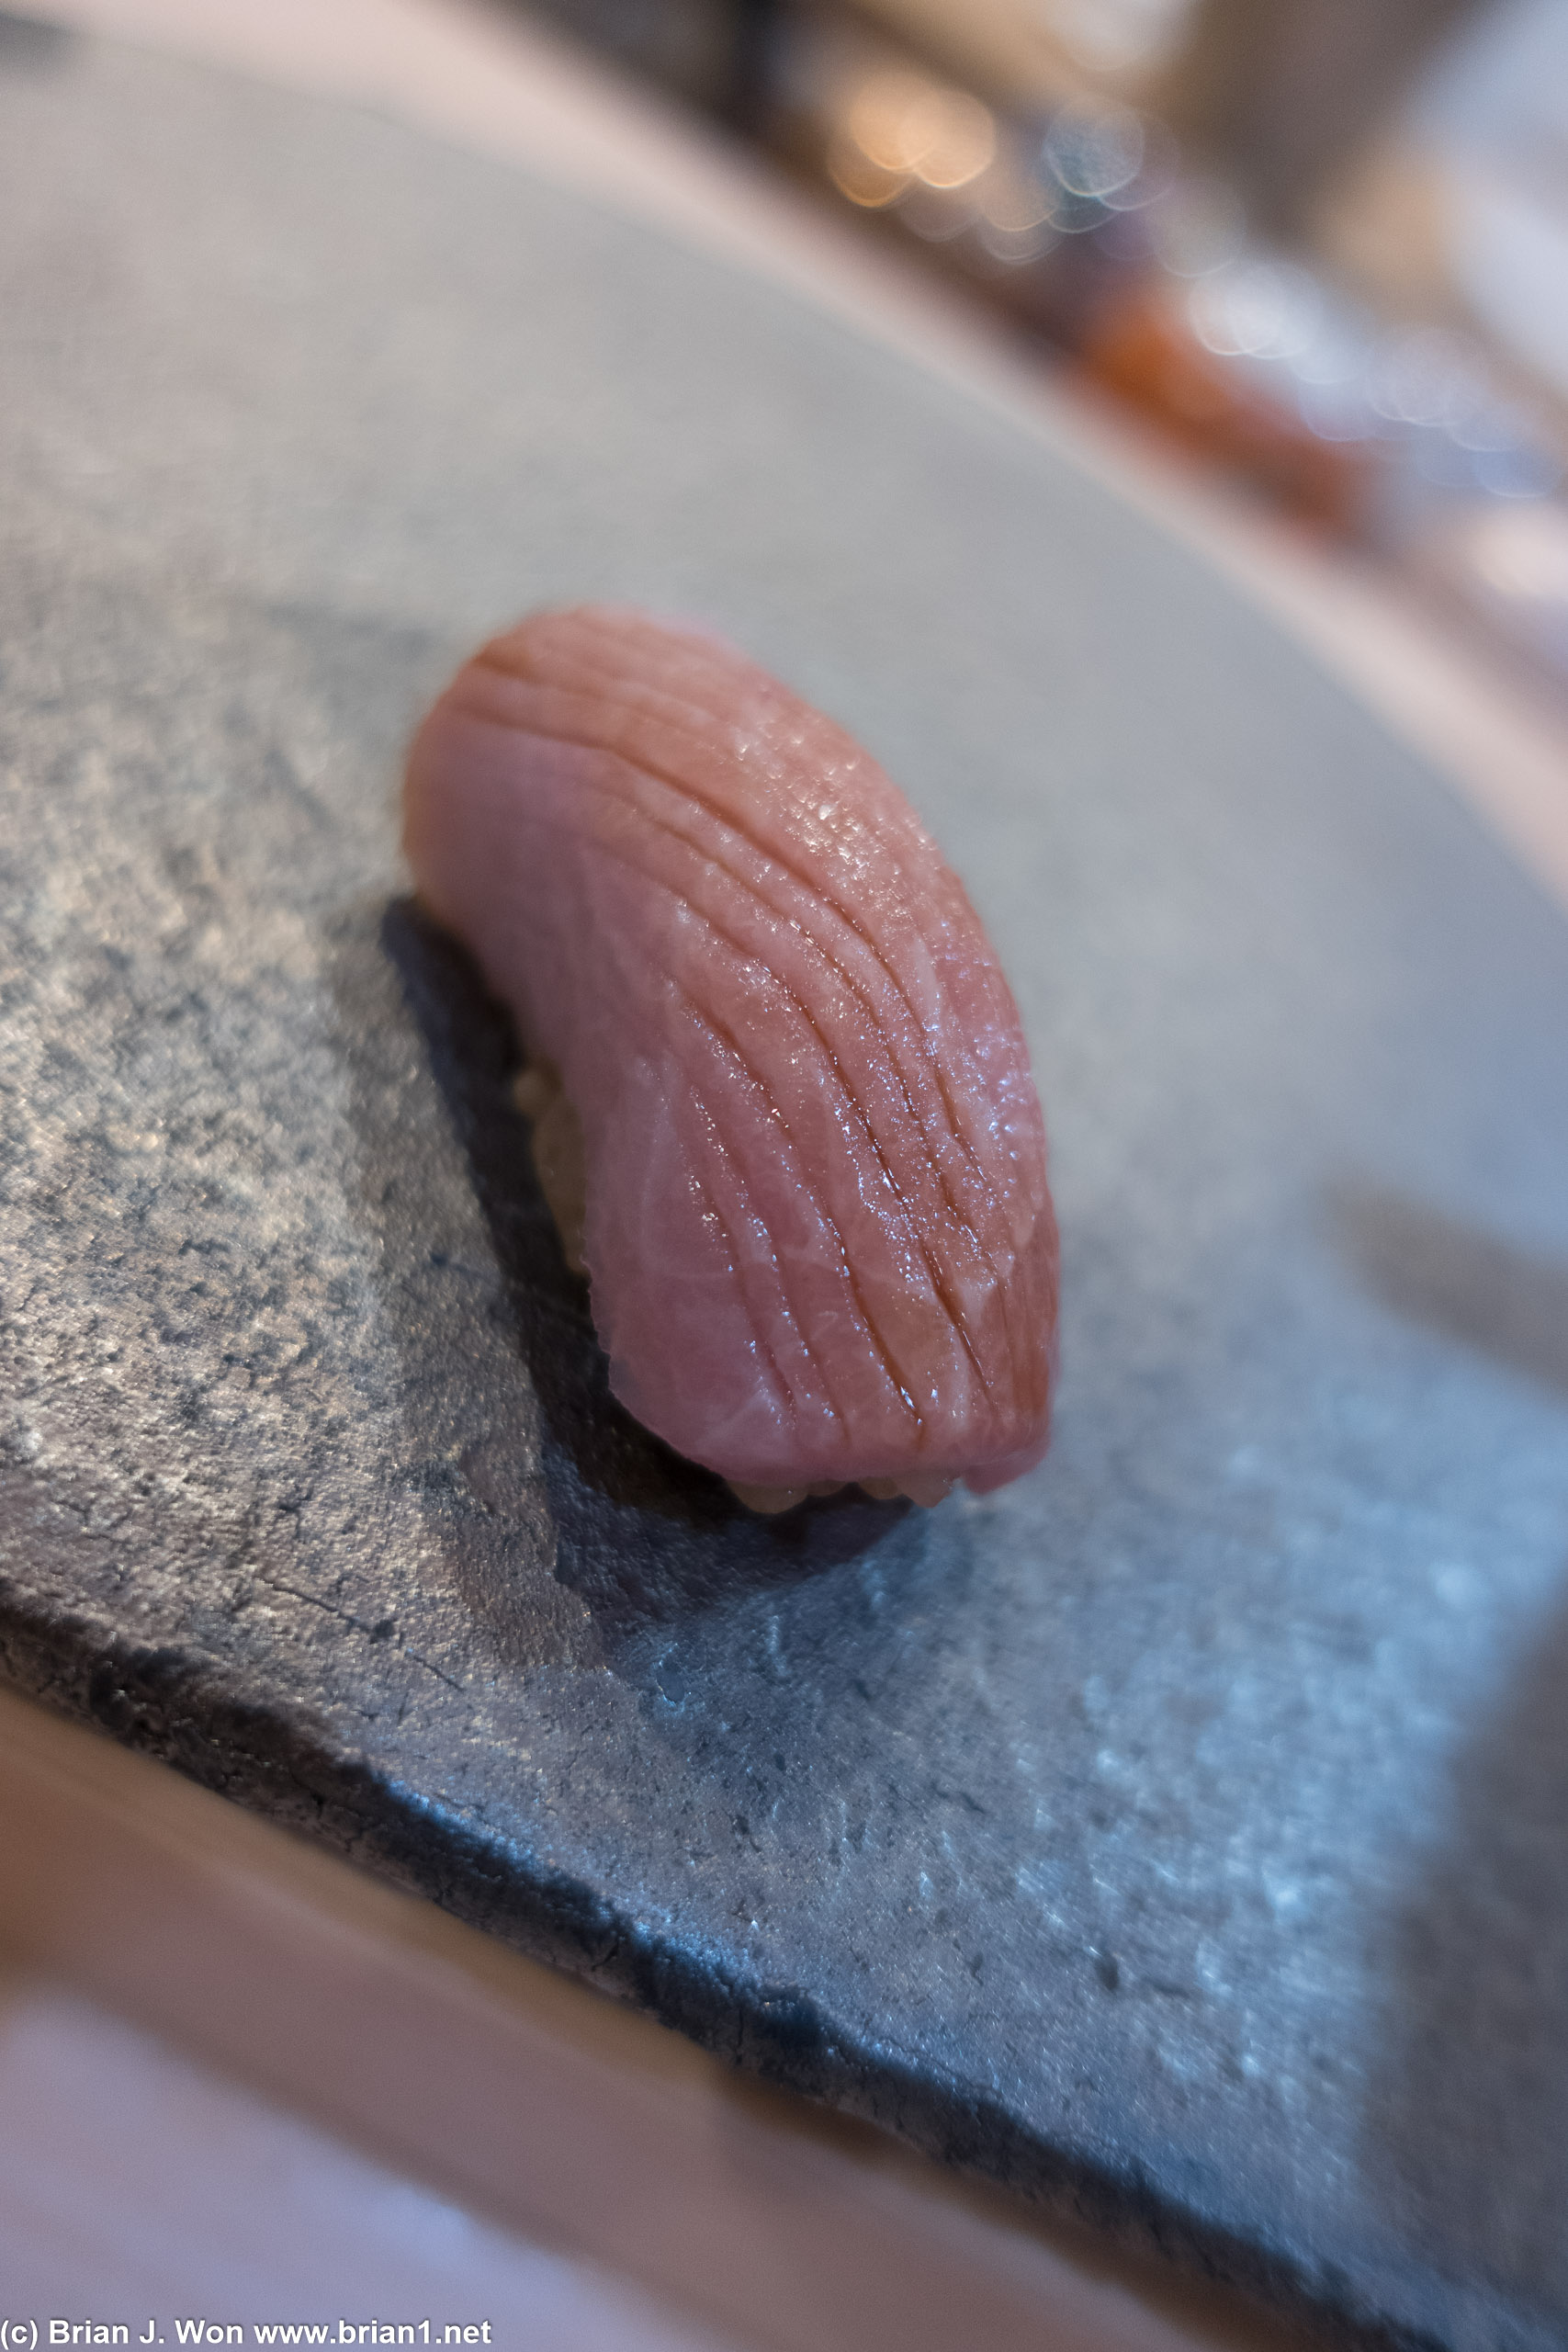 Otoro, warmed slightly on a warm plate before serving.